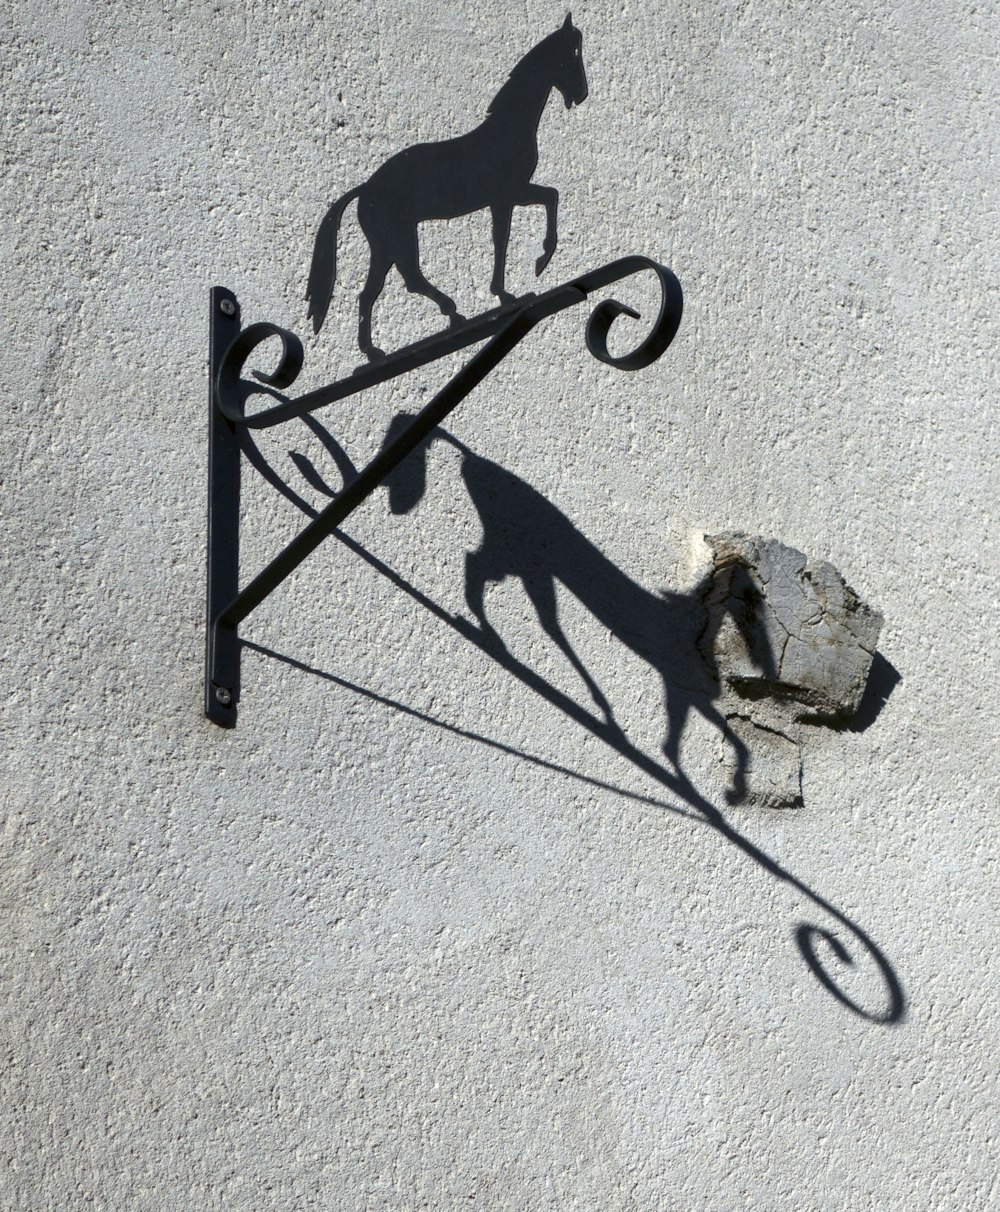 a pair of scissors and a dog